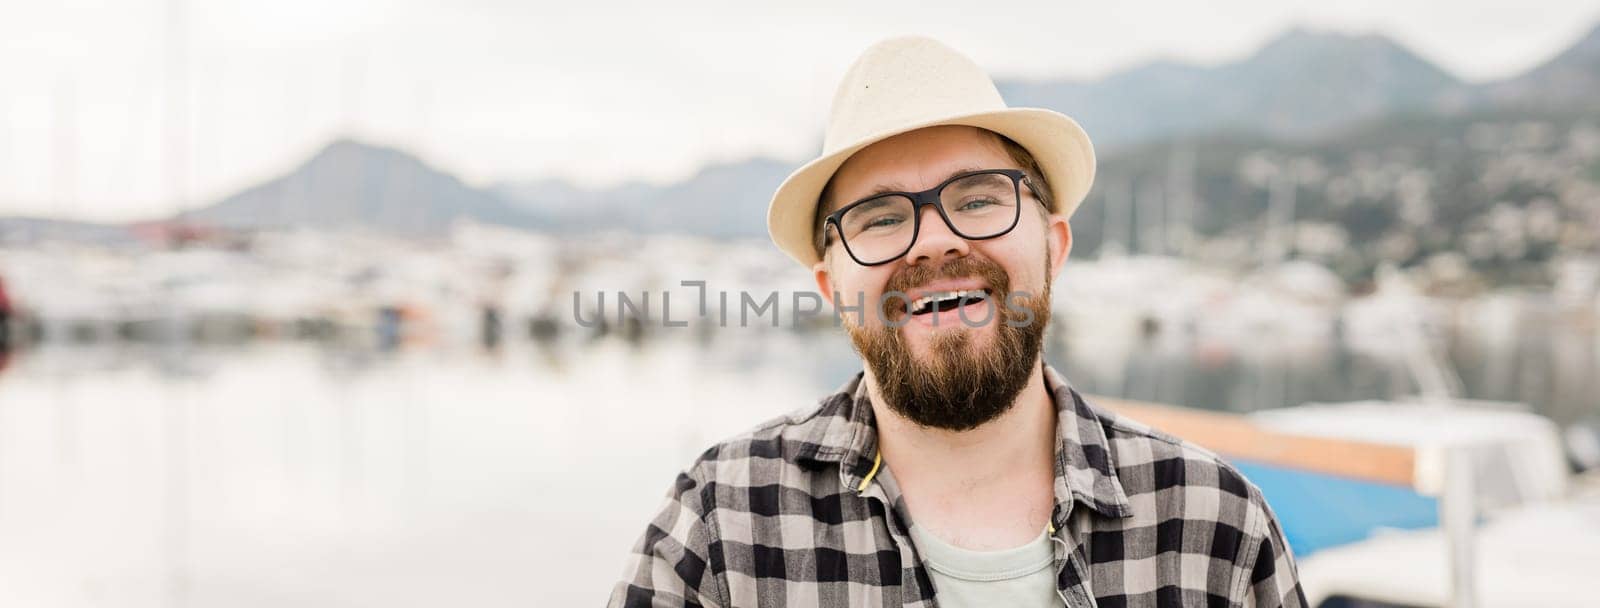 Banner millennial man wearing hat and glasses near marina with yachts. Portrait of laughing man with sea port background with copy space by Satura86